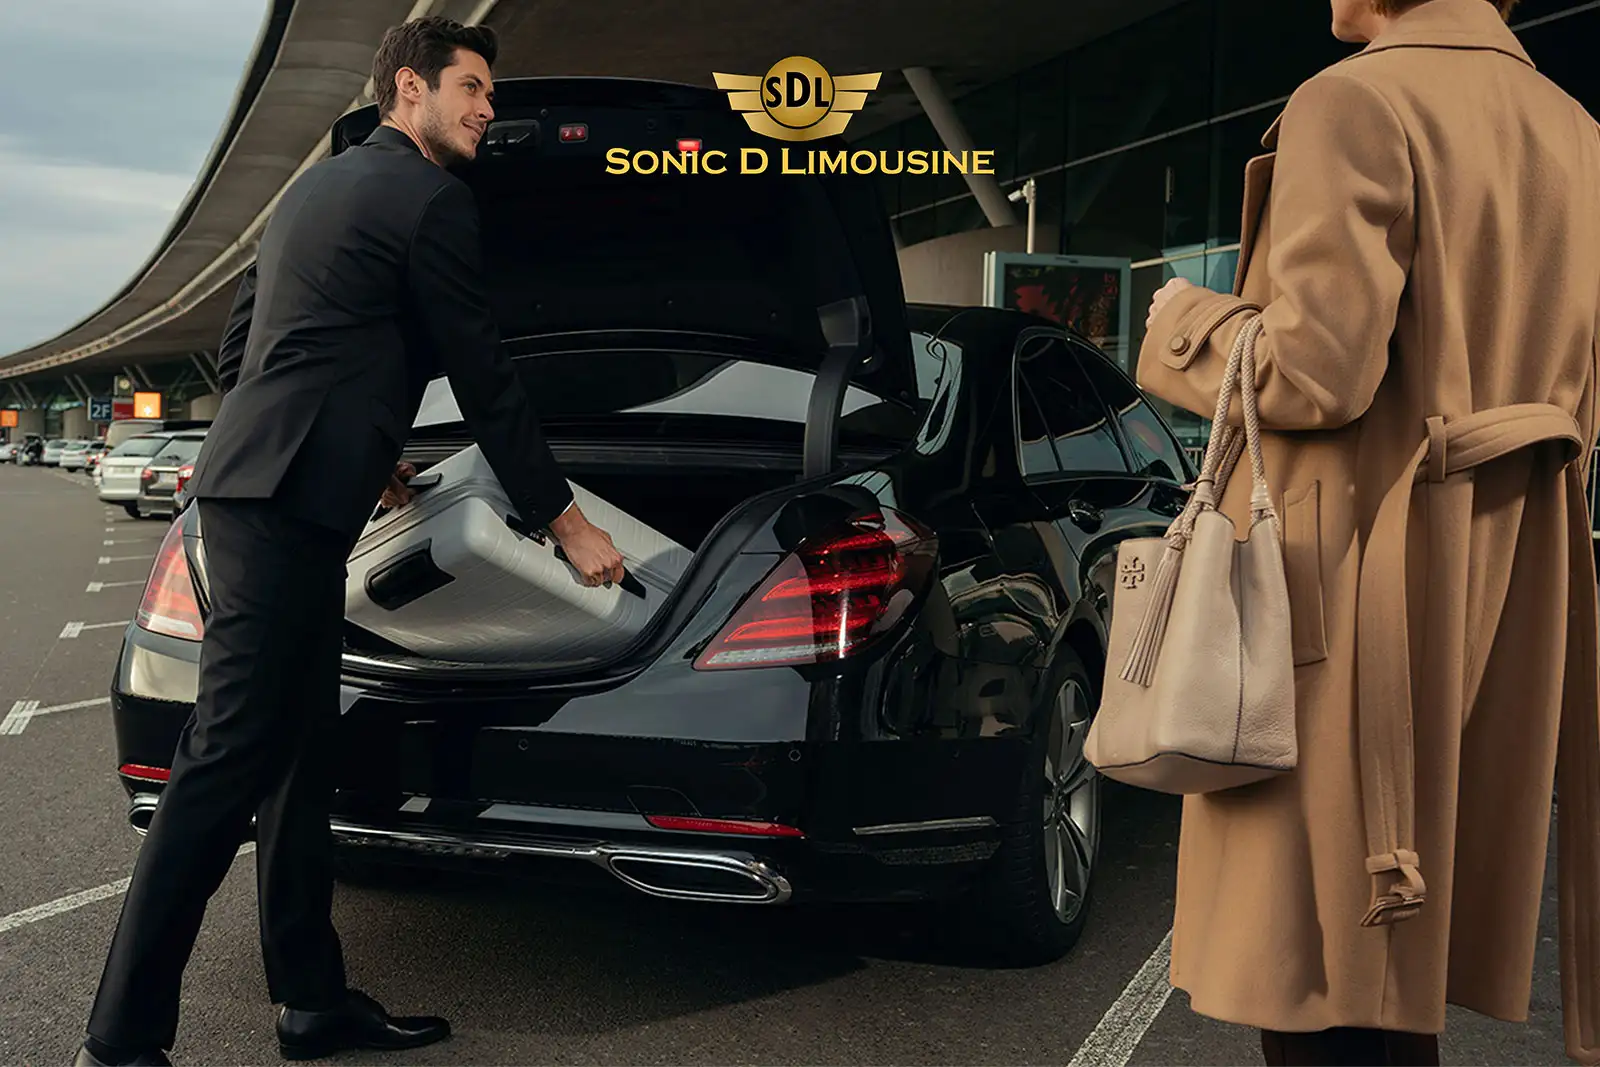 Sonic D Limousine A man and woman are loading their luggage into a mercedes benz.